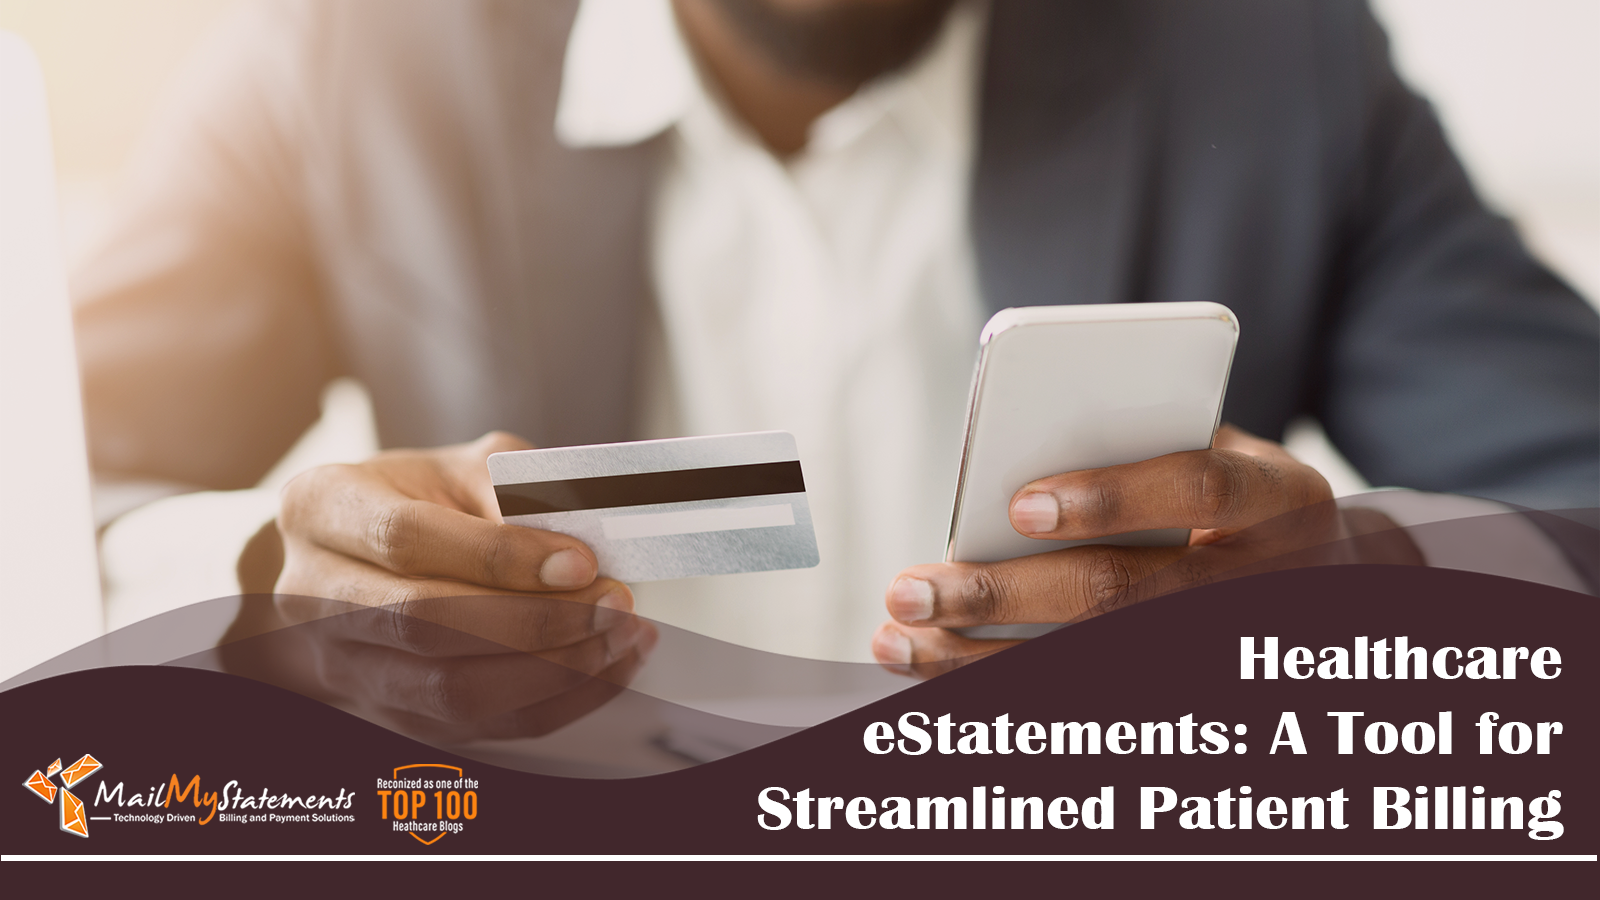 Healthcare eStatements: A Tool for Streamlined Patient Billing